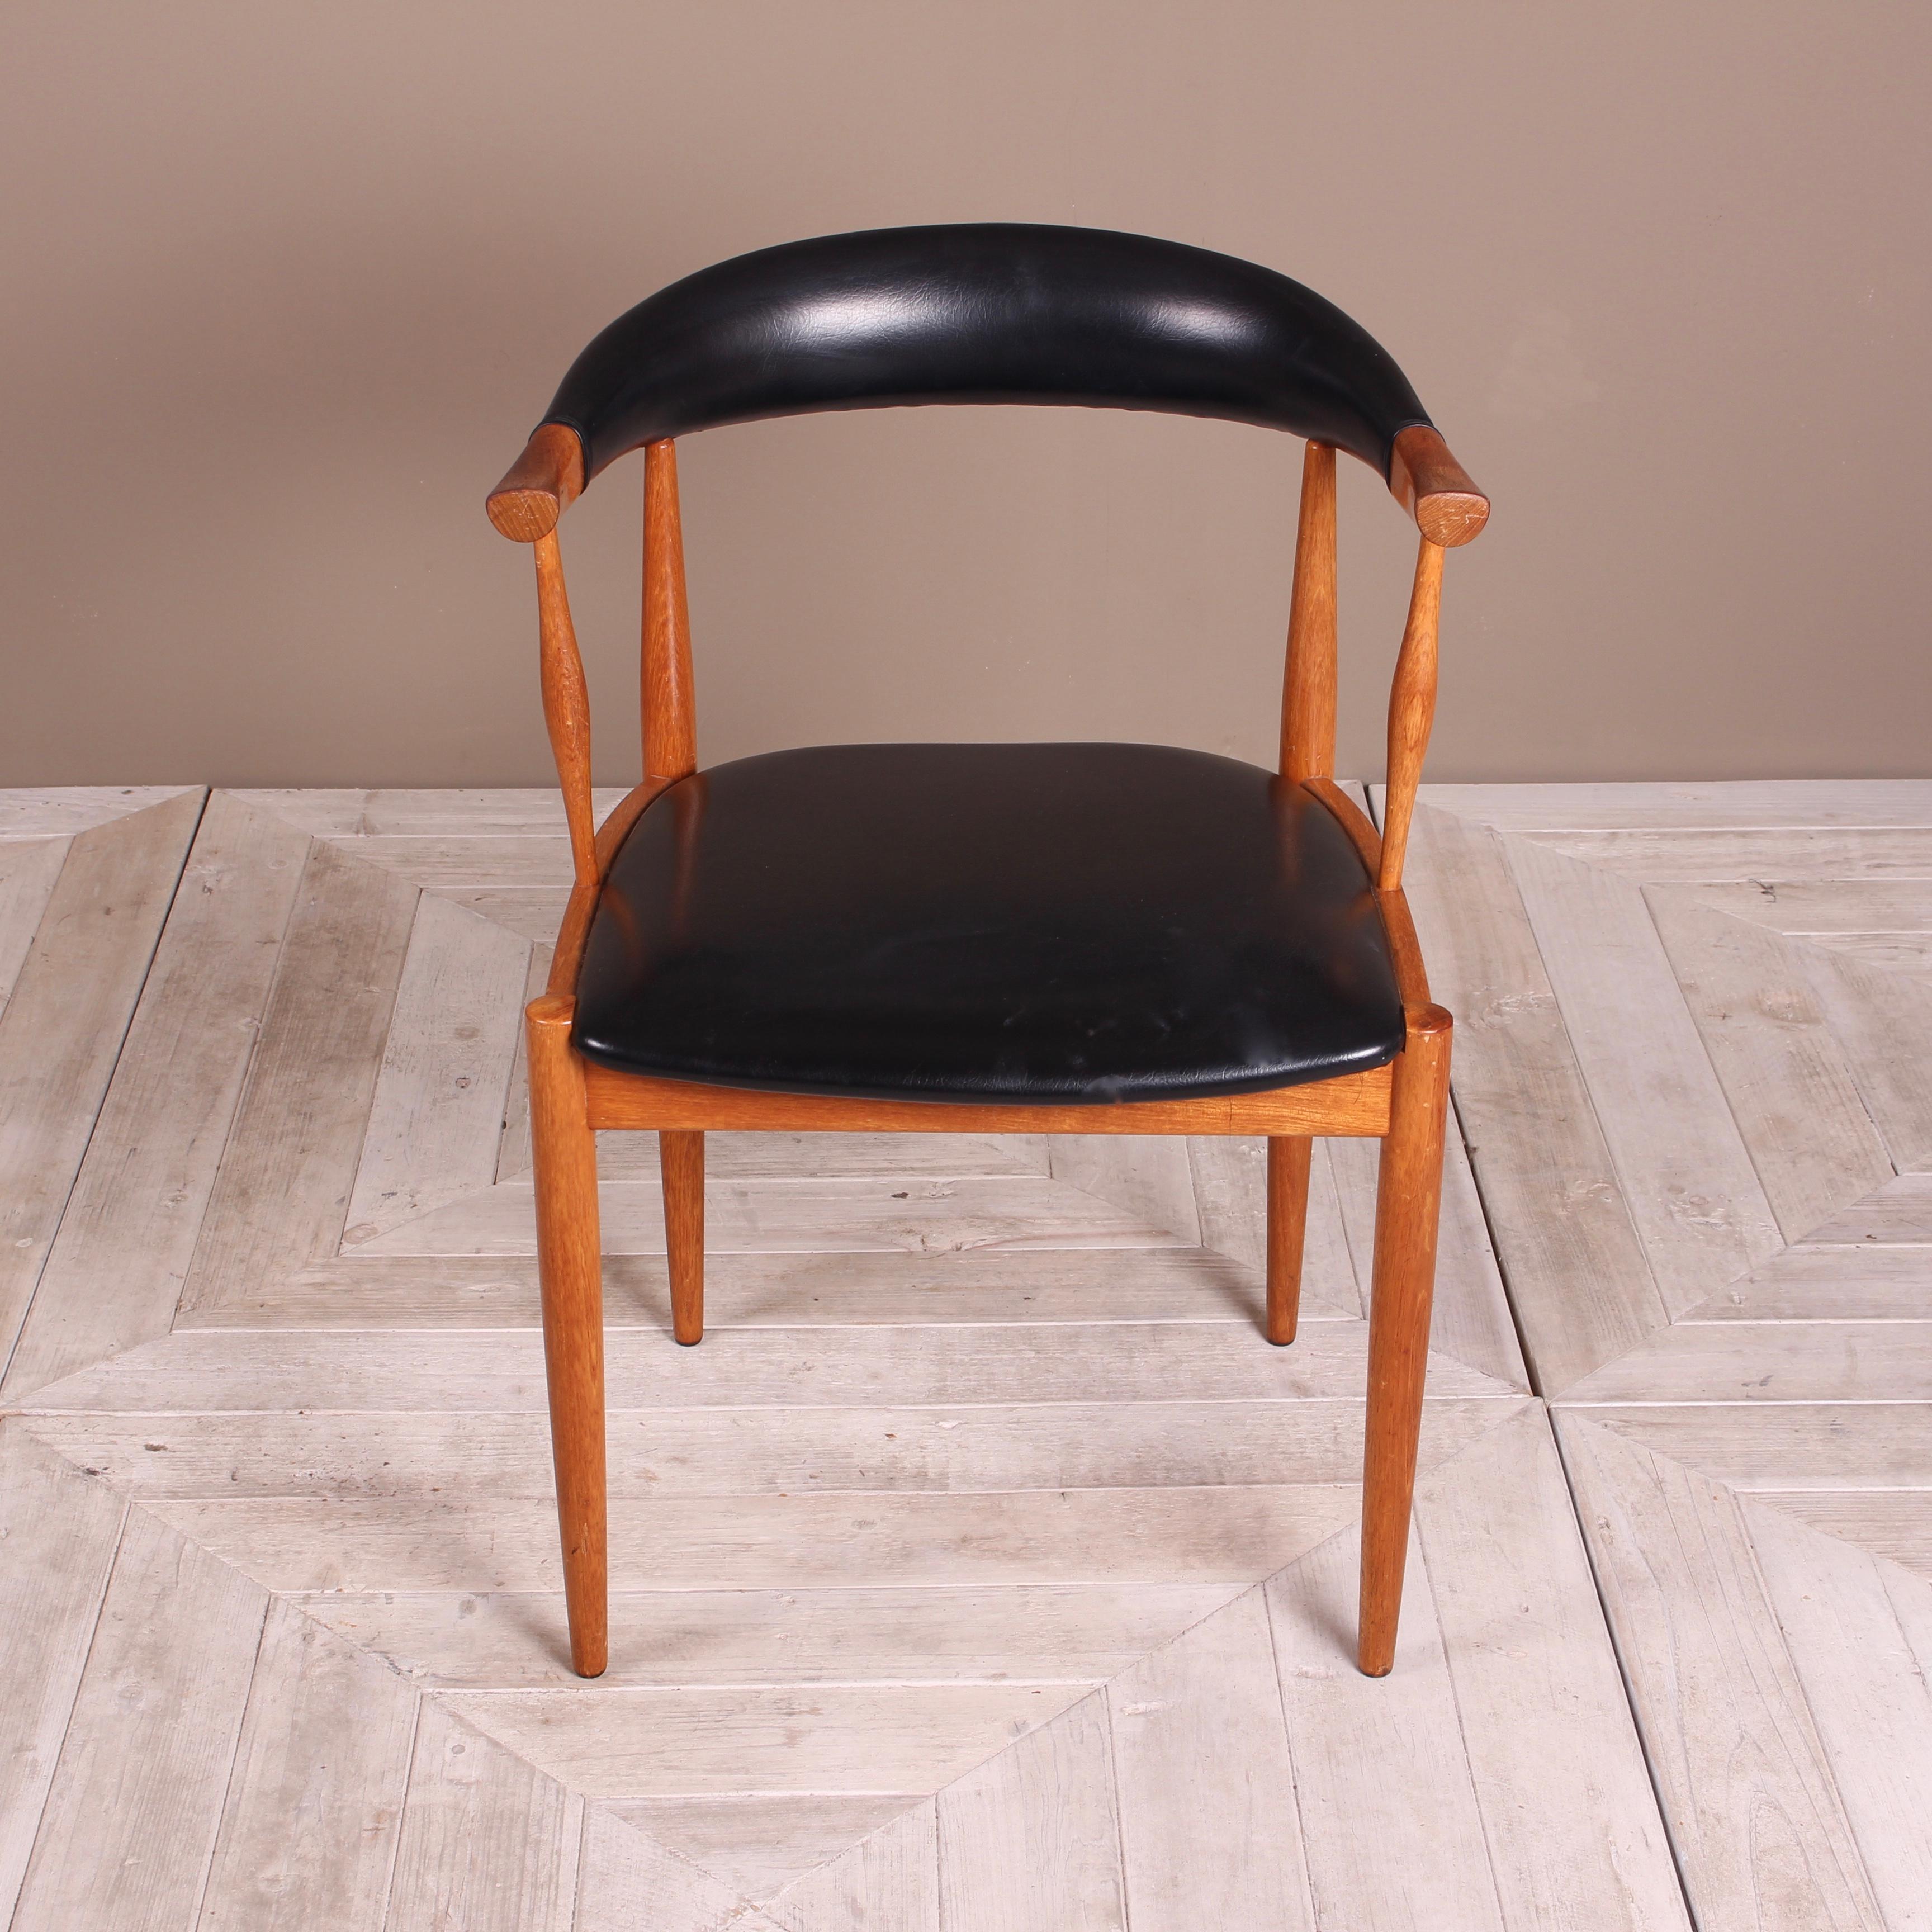 A stylish midcentury teak armchair by Johannes Andersen. Solid teak and faux leather vinyl. A very comfortable and supportive chair. Would also make a good desk chair.